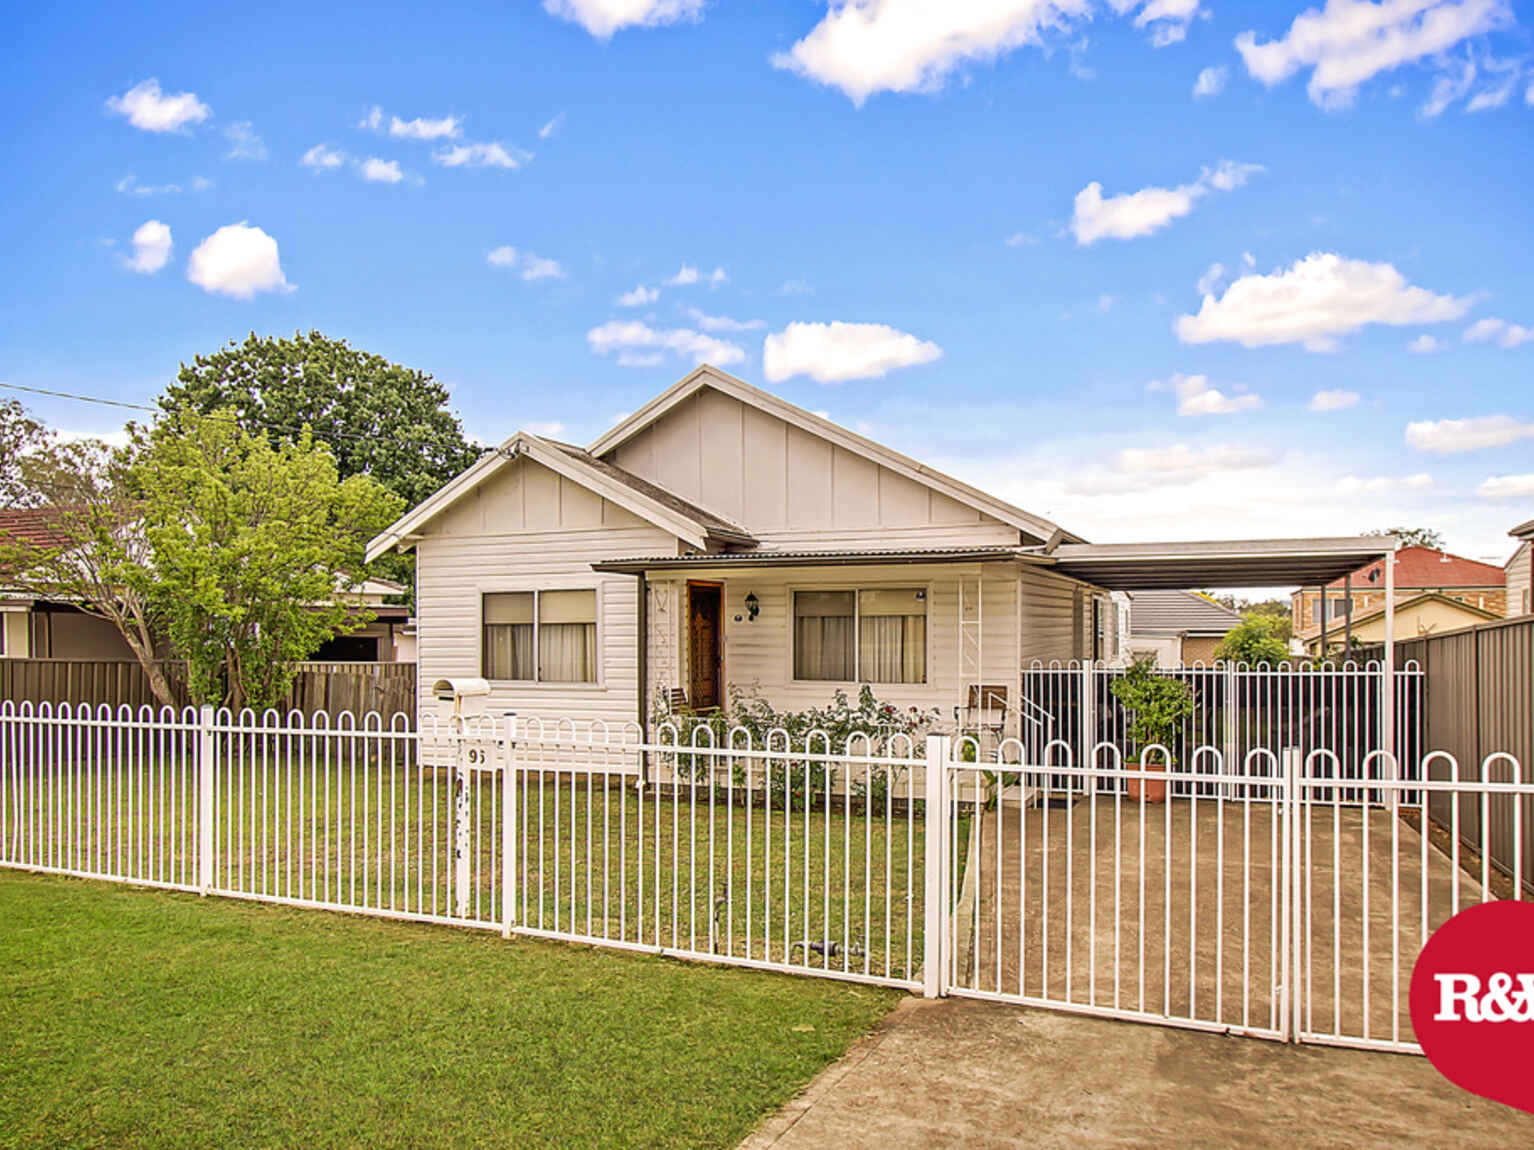 96 Rooty Hill Road North Rooty Hill